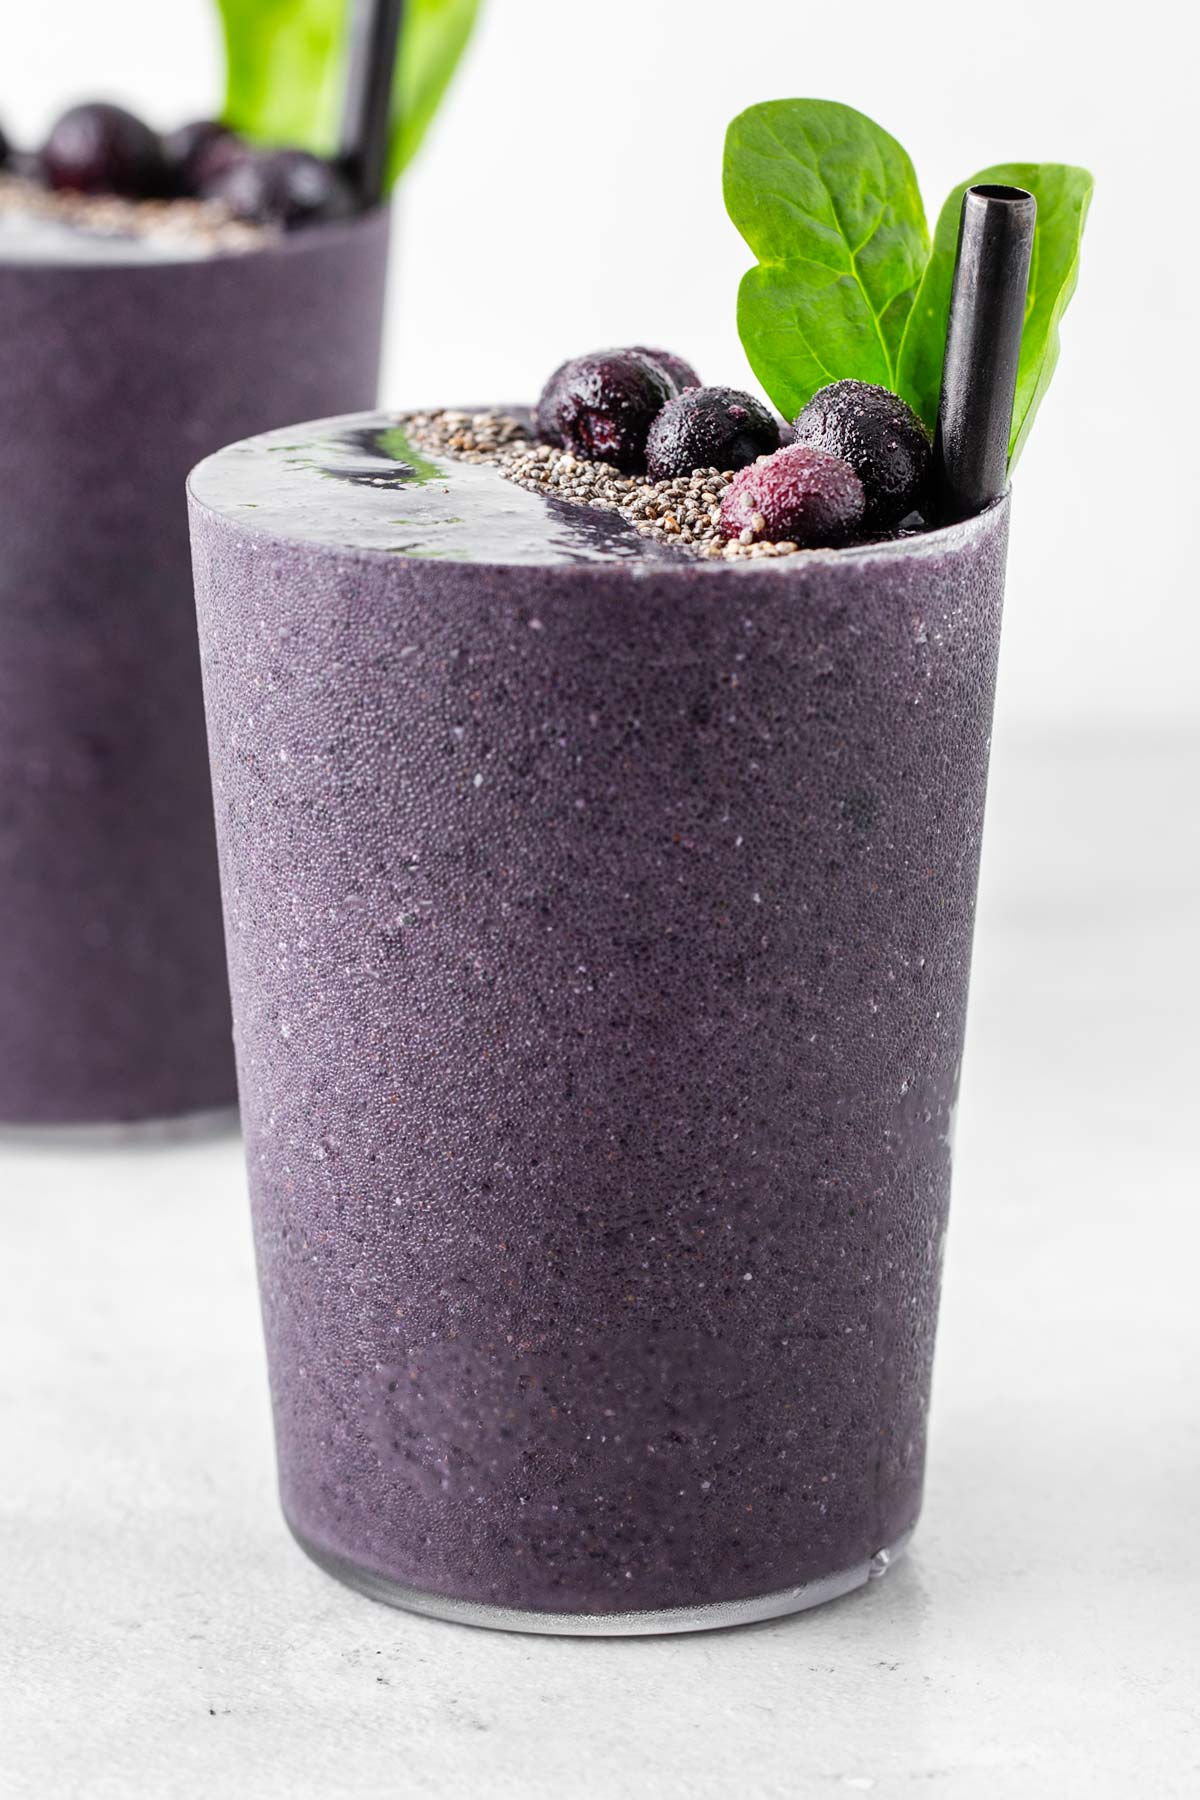 Blueberry smoothie in a glass.